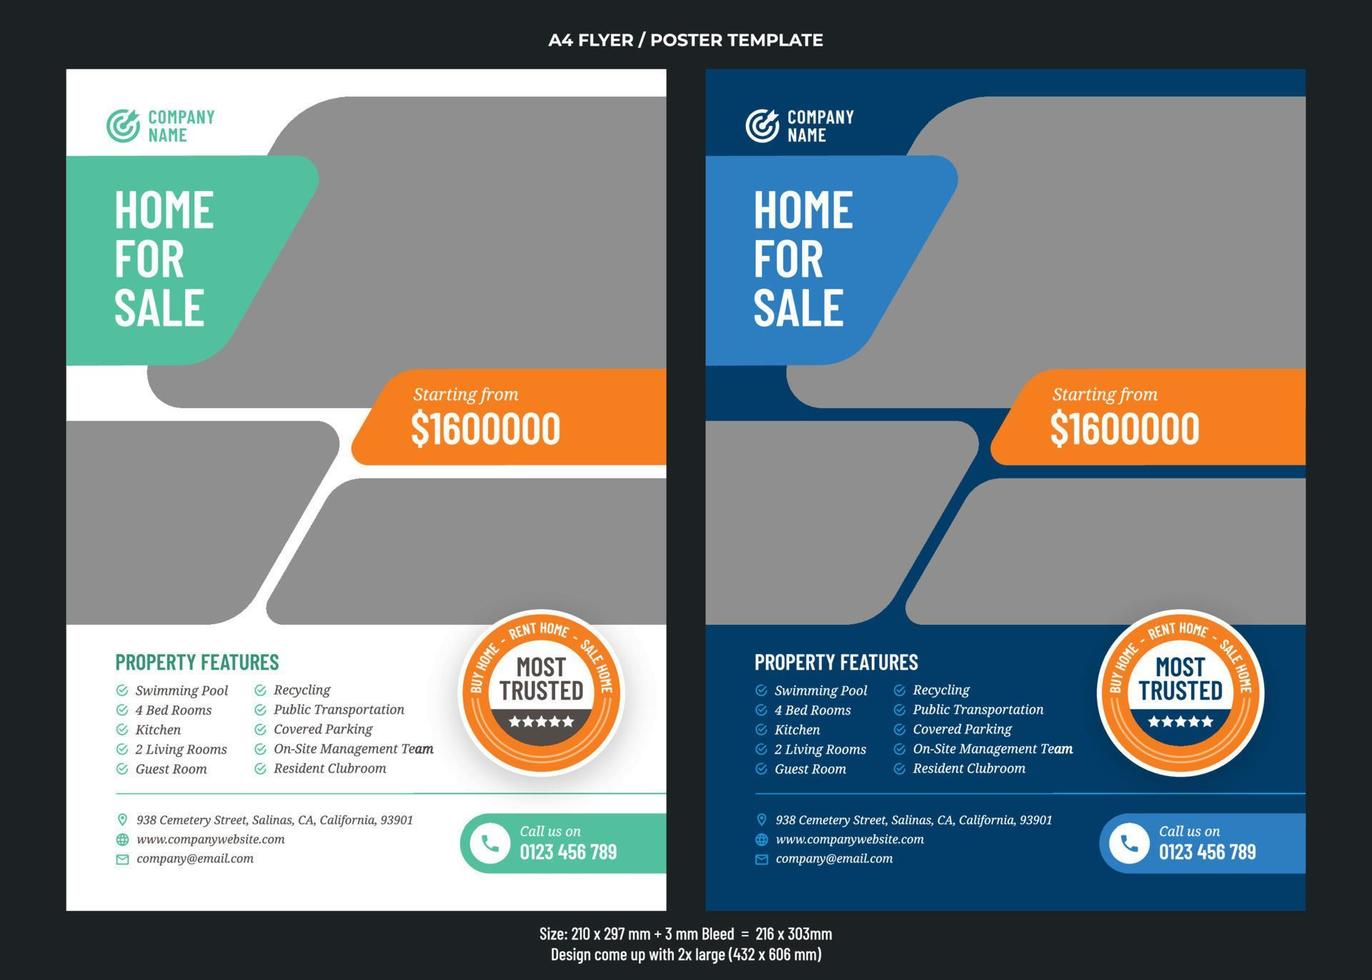 Real estate business A4 flyer or poster design template vector